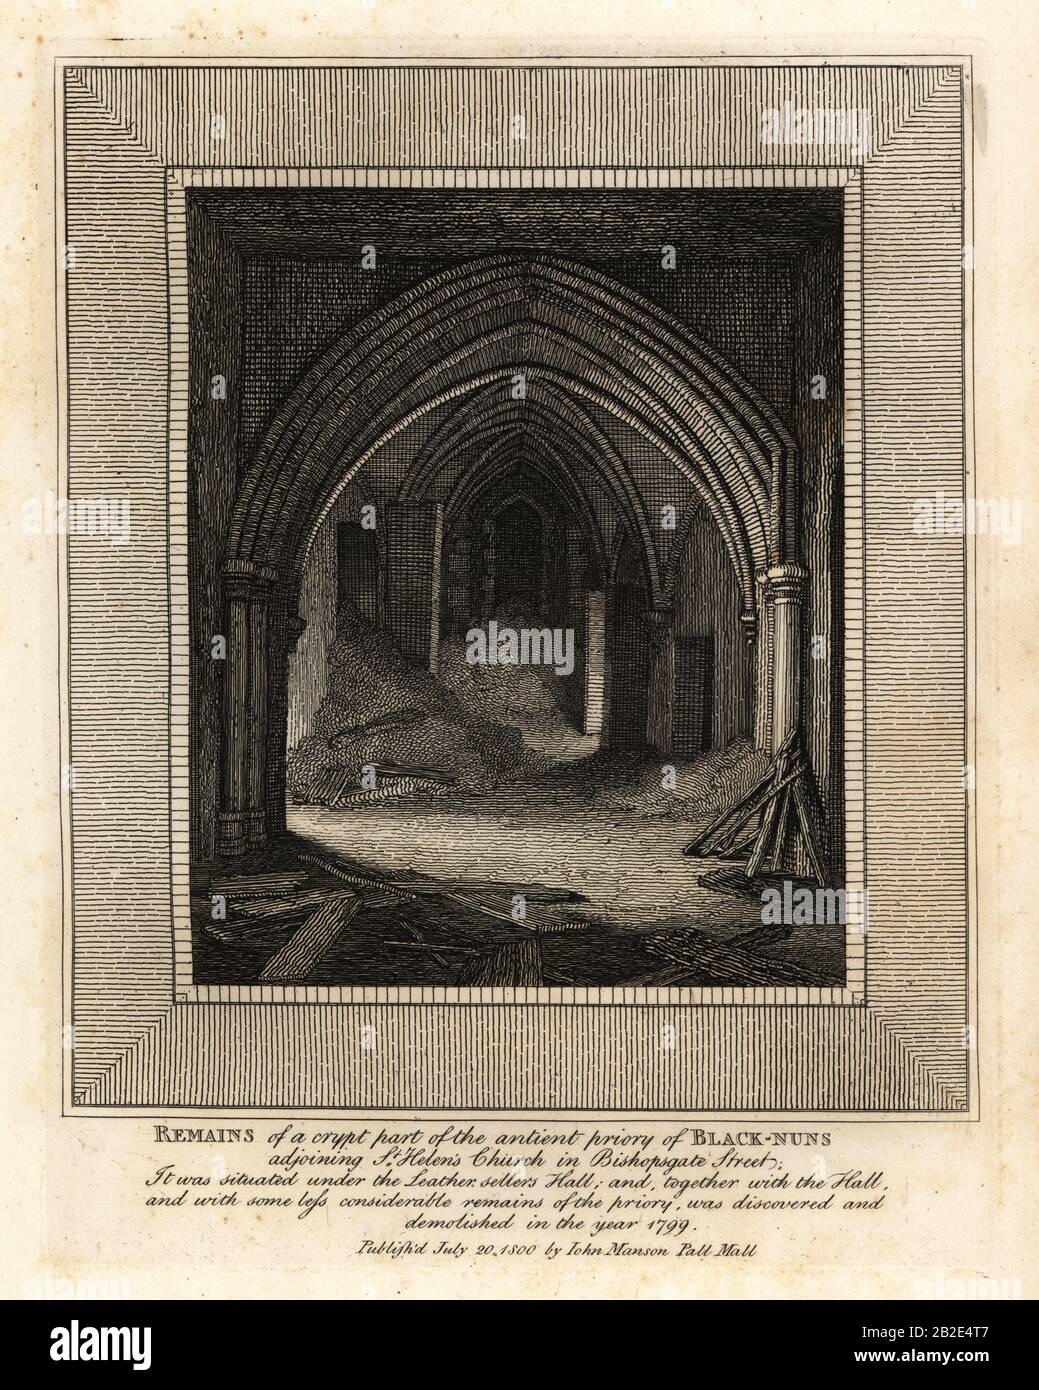 Remains of the crypt part of the ancient priory of Black-Nuns, adjoining St. Helen’s Church, Bishopsgate Street. Copperplate engraving by John Thomas Smith after original drawings by members of the Society of Antiquaries from his J.T. Smith’s Antiquities of London and its Environs, J. Sewell, R. Folder, J. Simco, London, 1800. Stock Photo